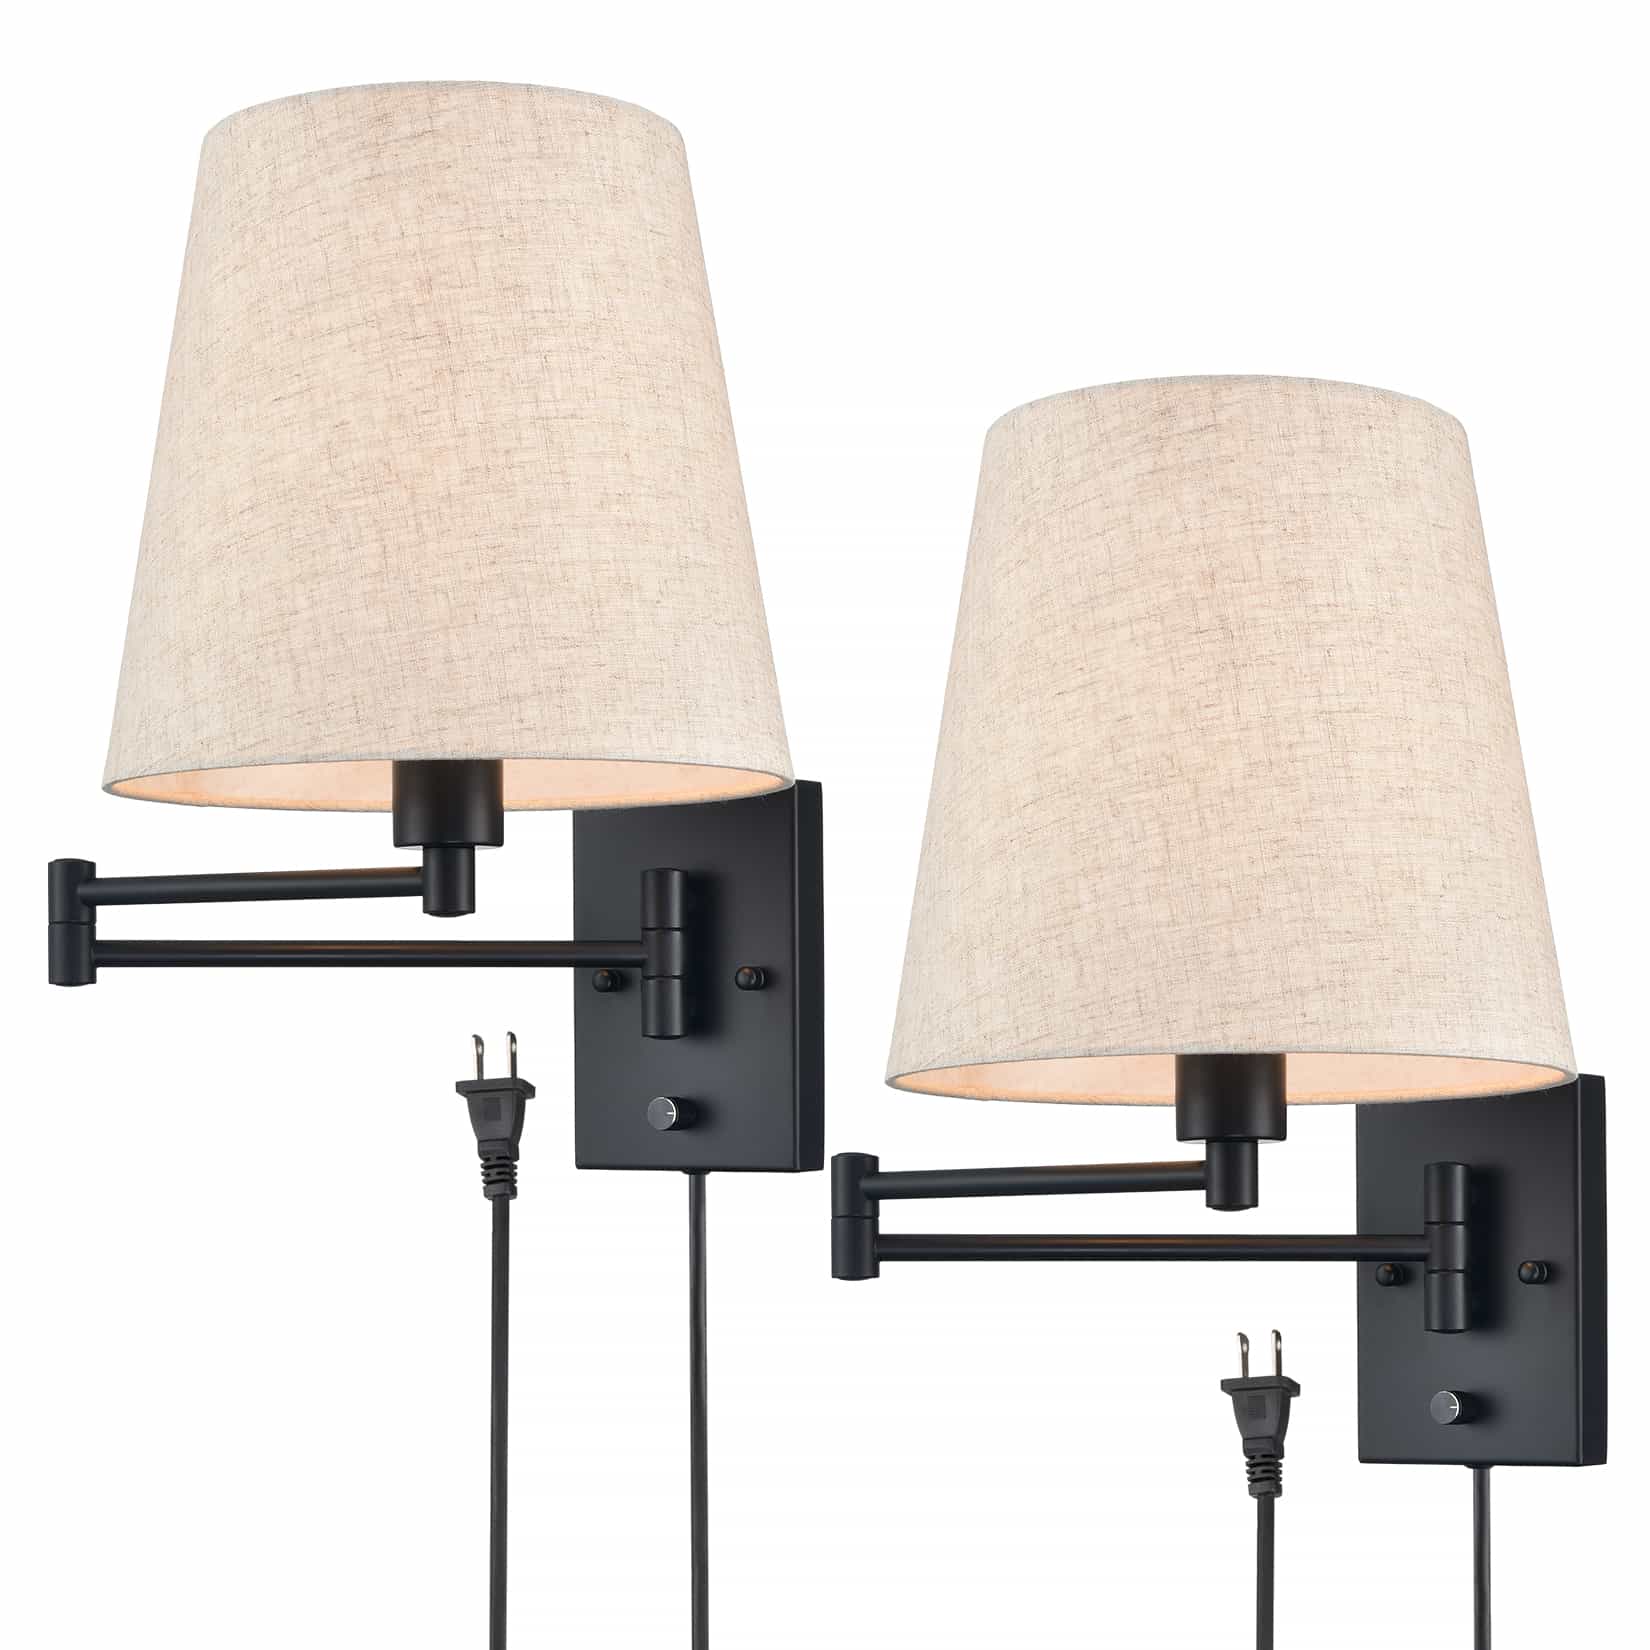 Black Swing Arm Wall Sconces Set of Two Plug in Wall Lamp